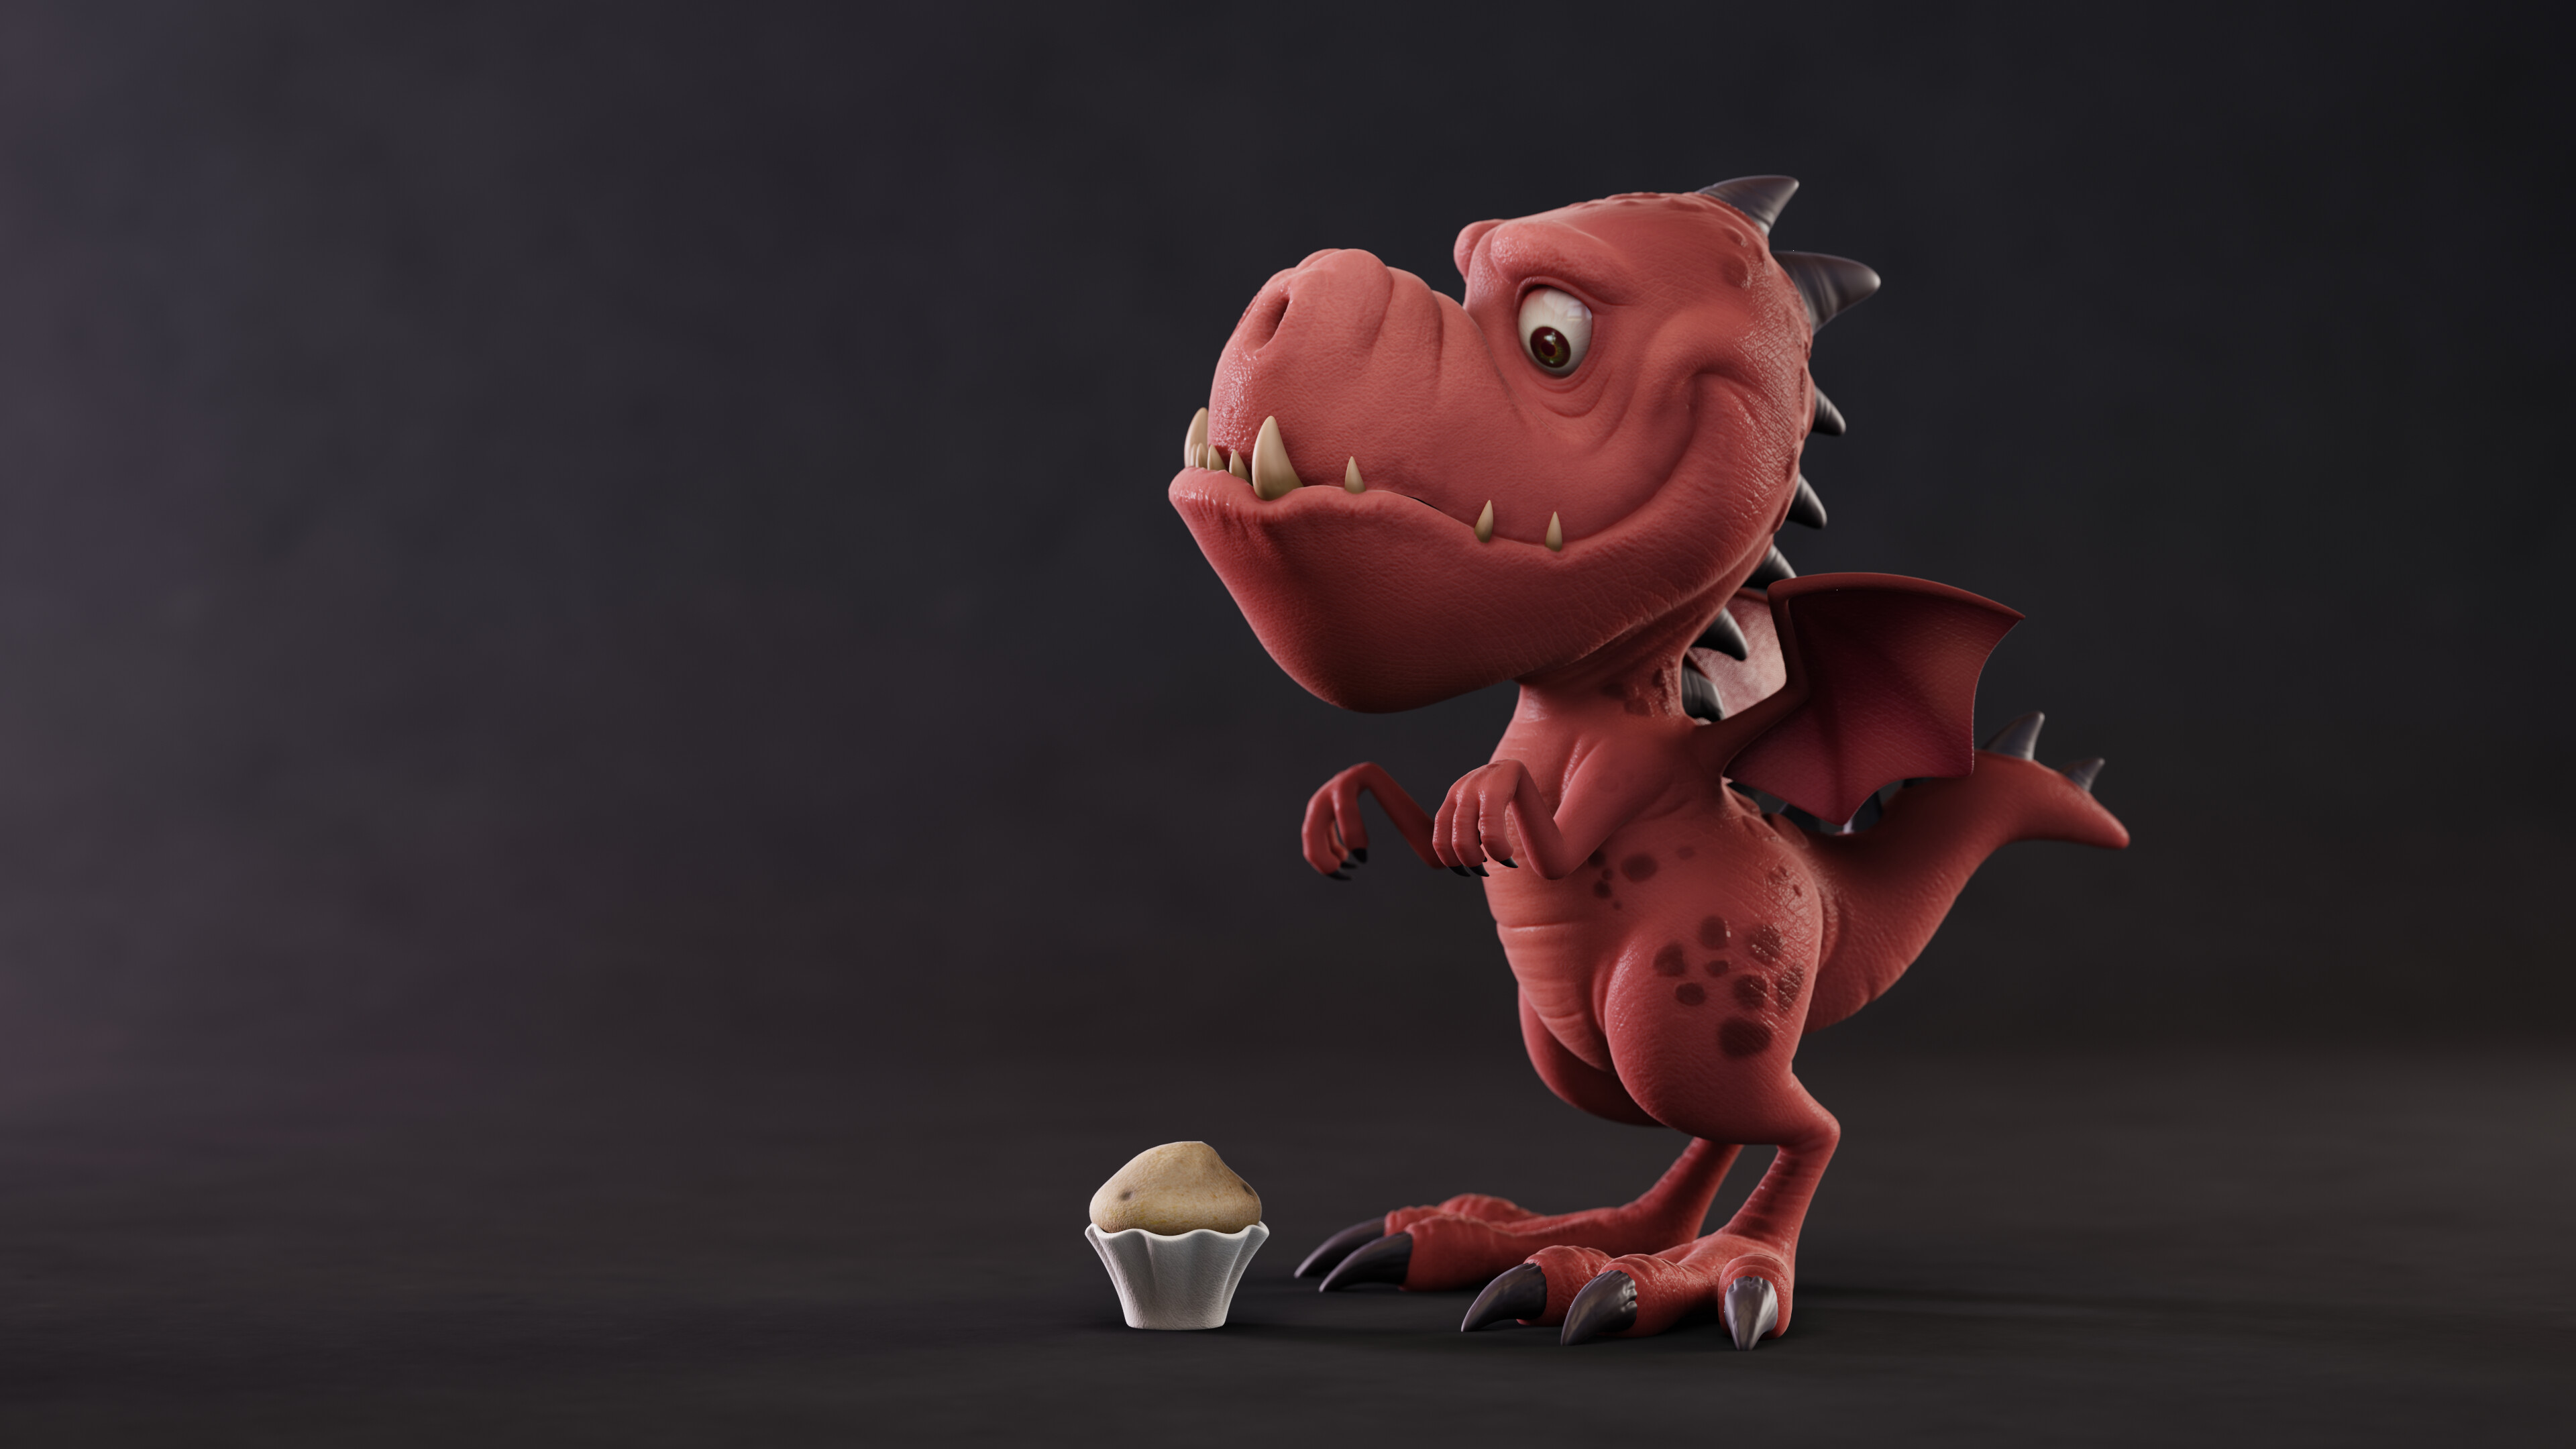 3D file Dragon Ball Red Dinosaur Run! 🐉・Model to download and 3D